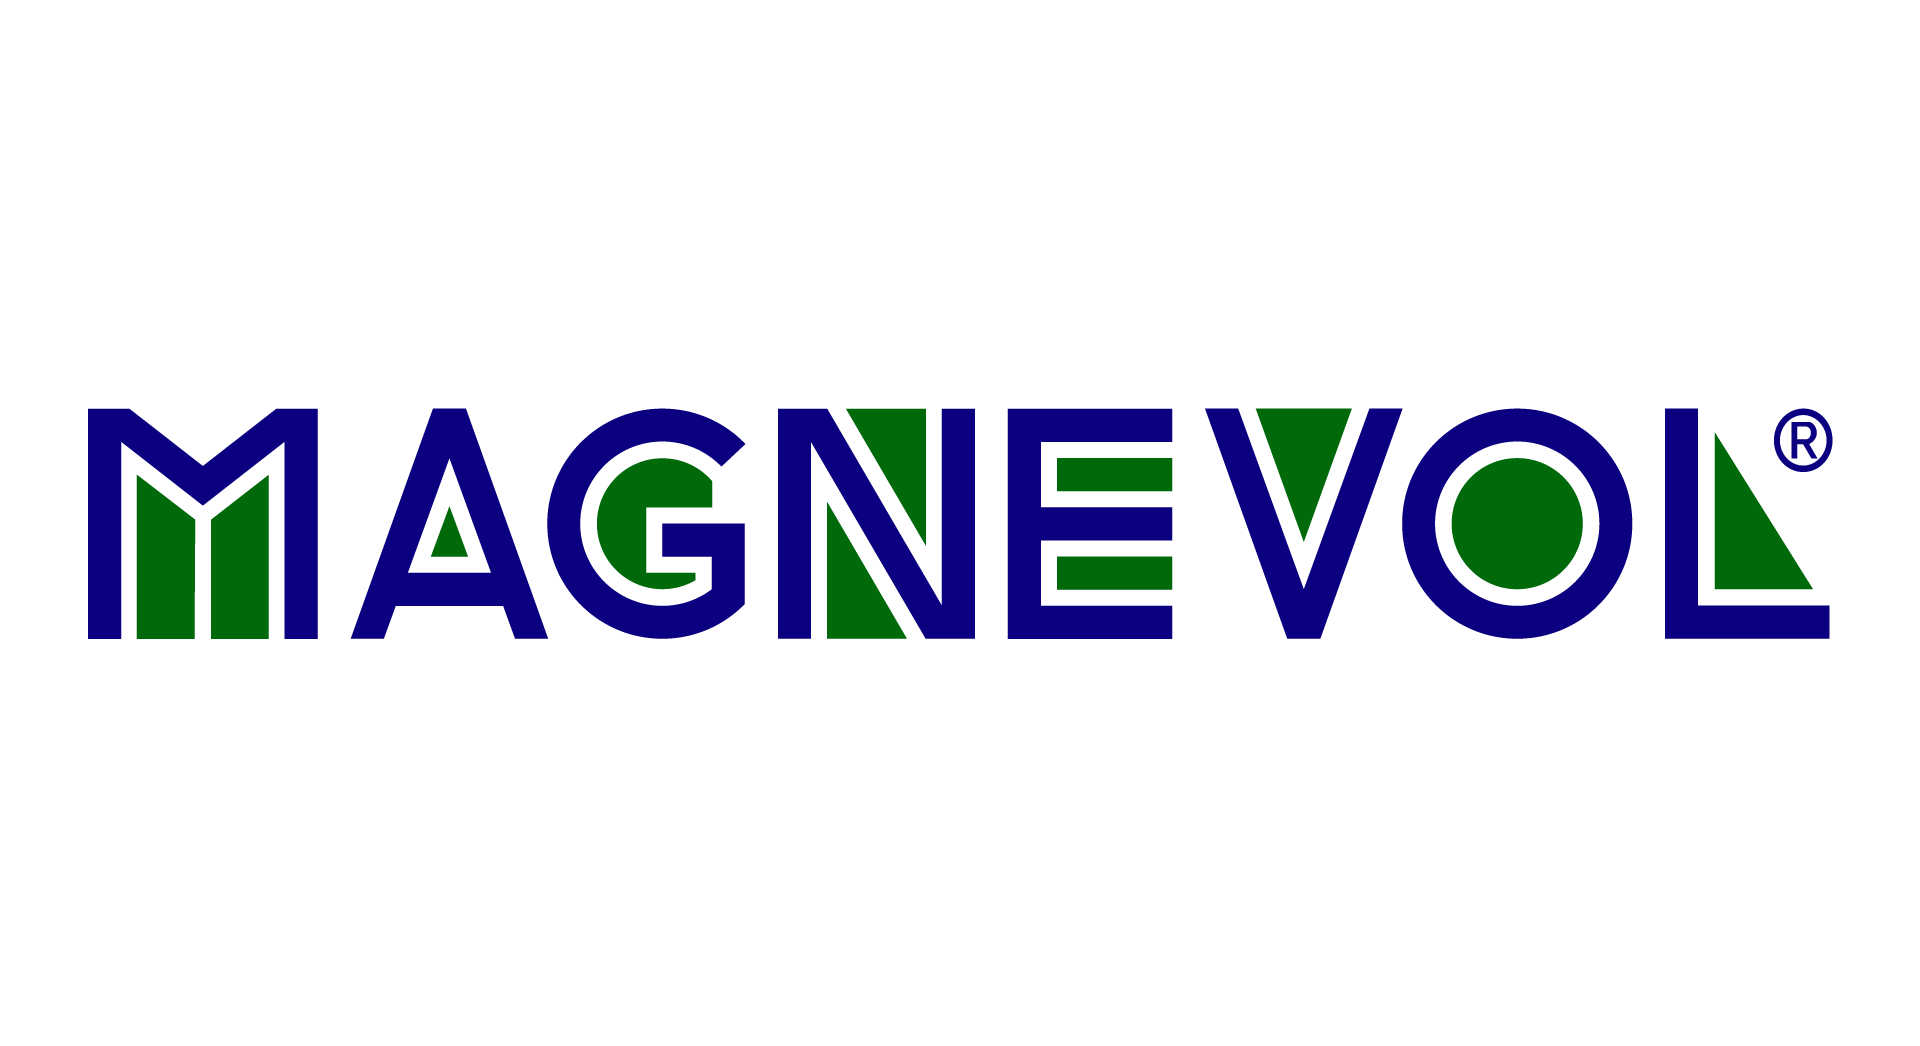 Logo of MAGNEVOL - the research product category focused on 'developmental nurturance' in schools